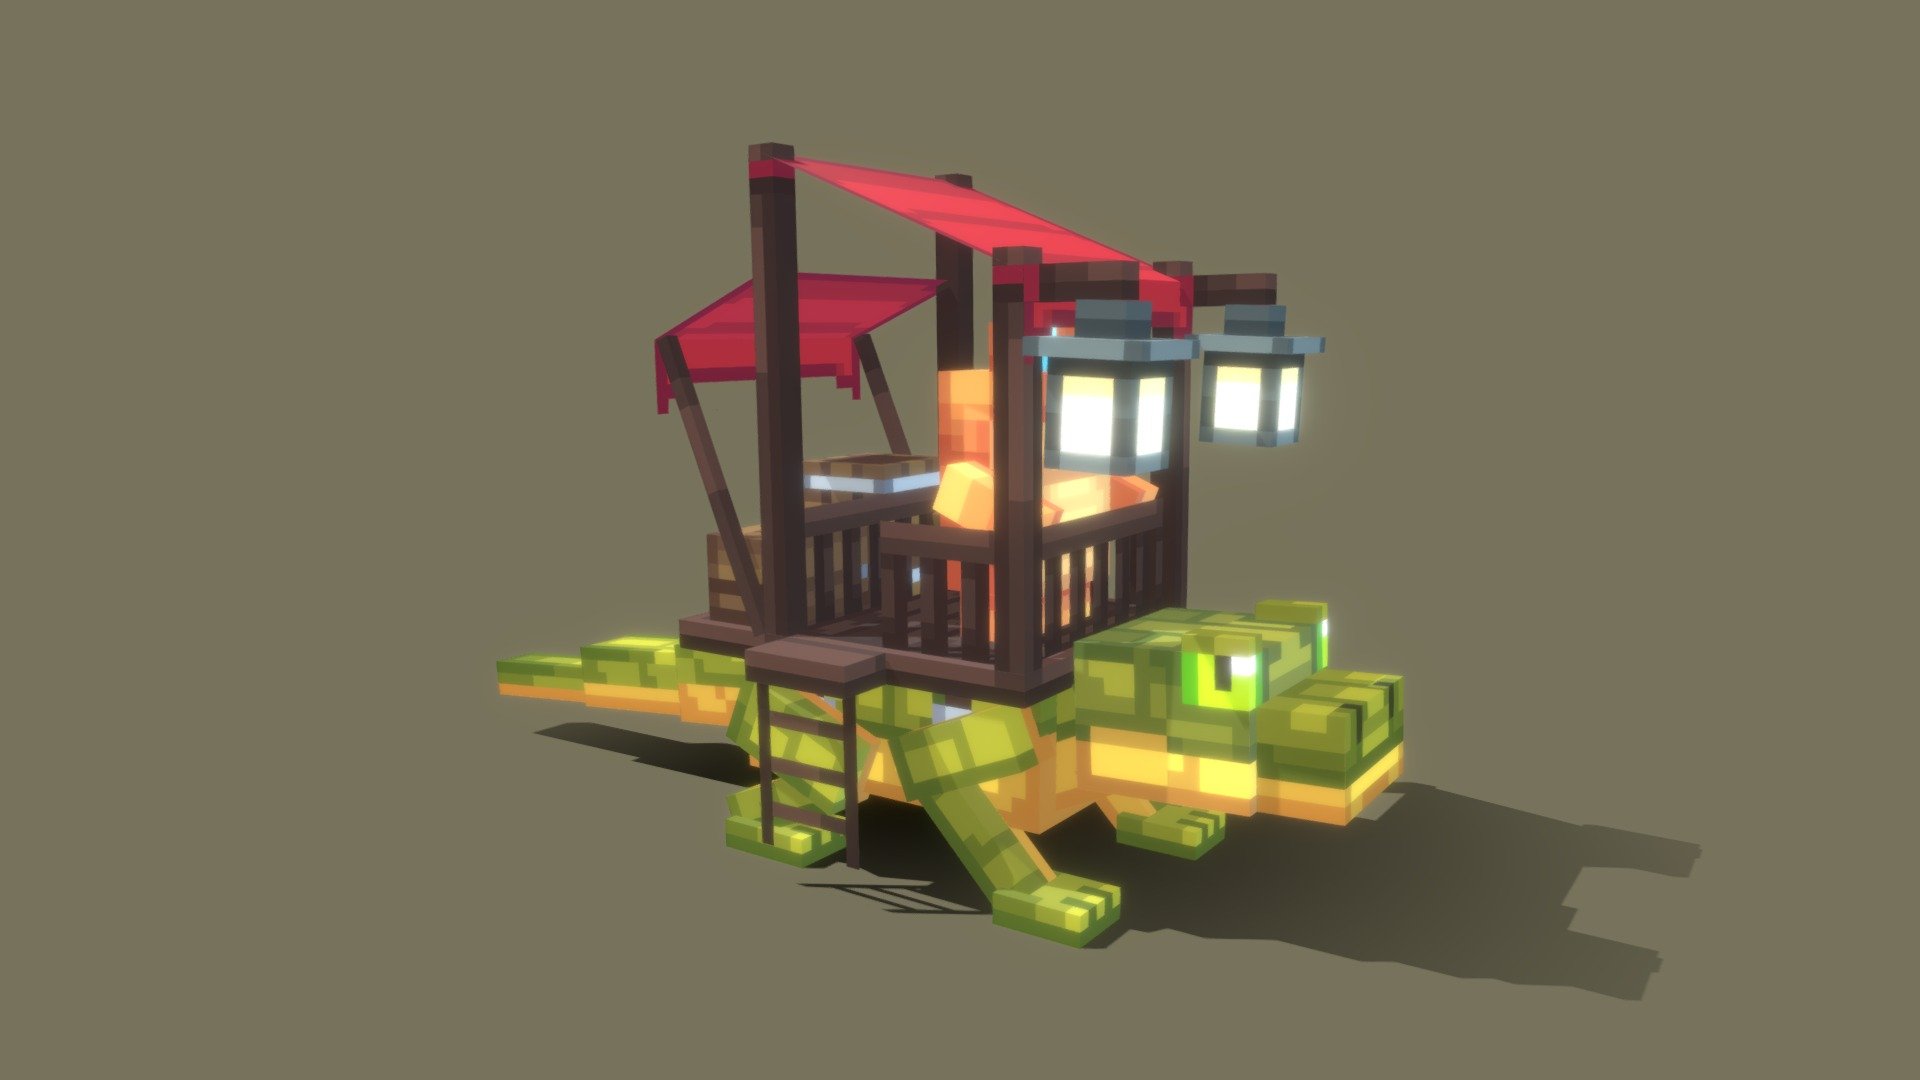 This is one of my latest 3D models made in blockbench. I hope you like it! - Frog Wagon - 3D model by Fyrtarn (@ArtistFyrtarn) 3d model